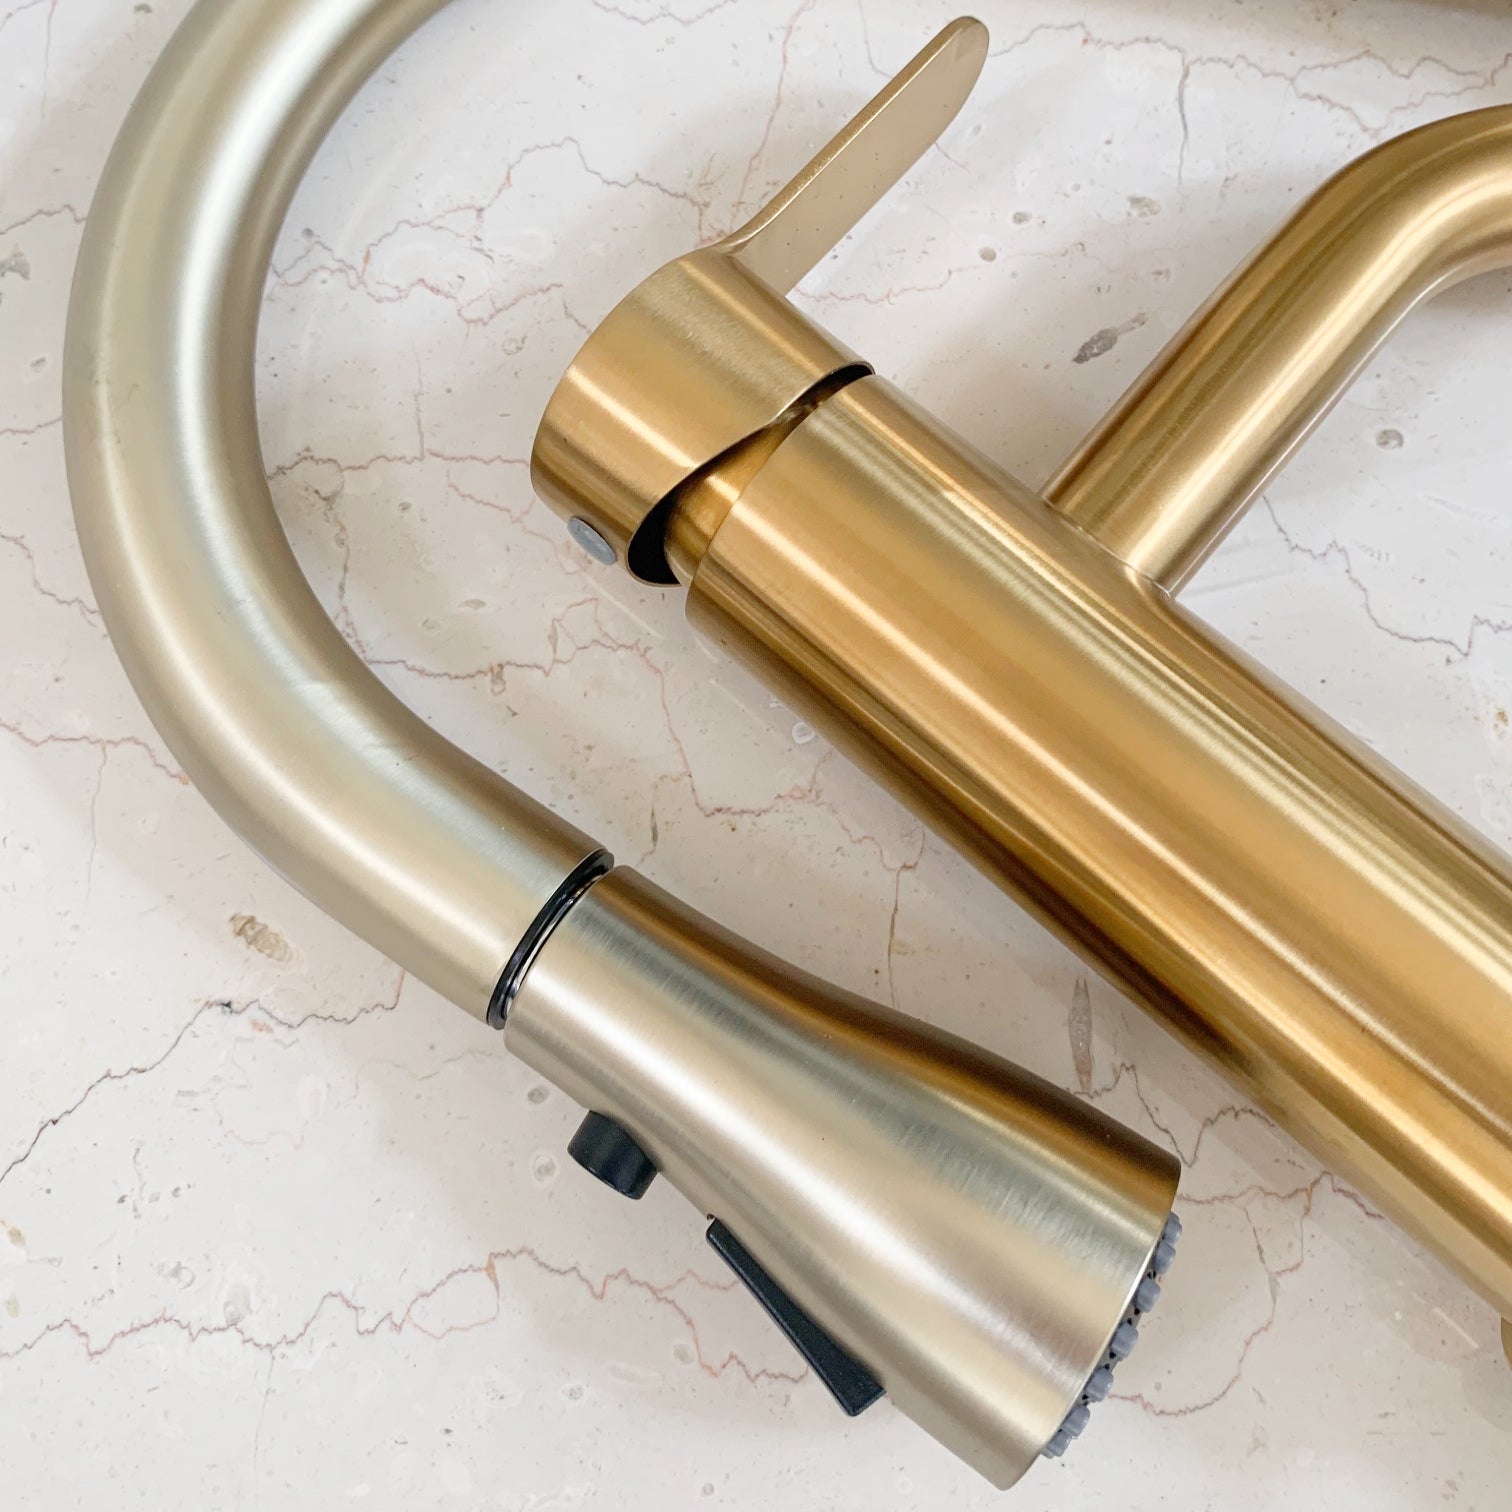 Matching Cabinet Hardware for Popular Gold Faucets on Amazon